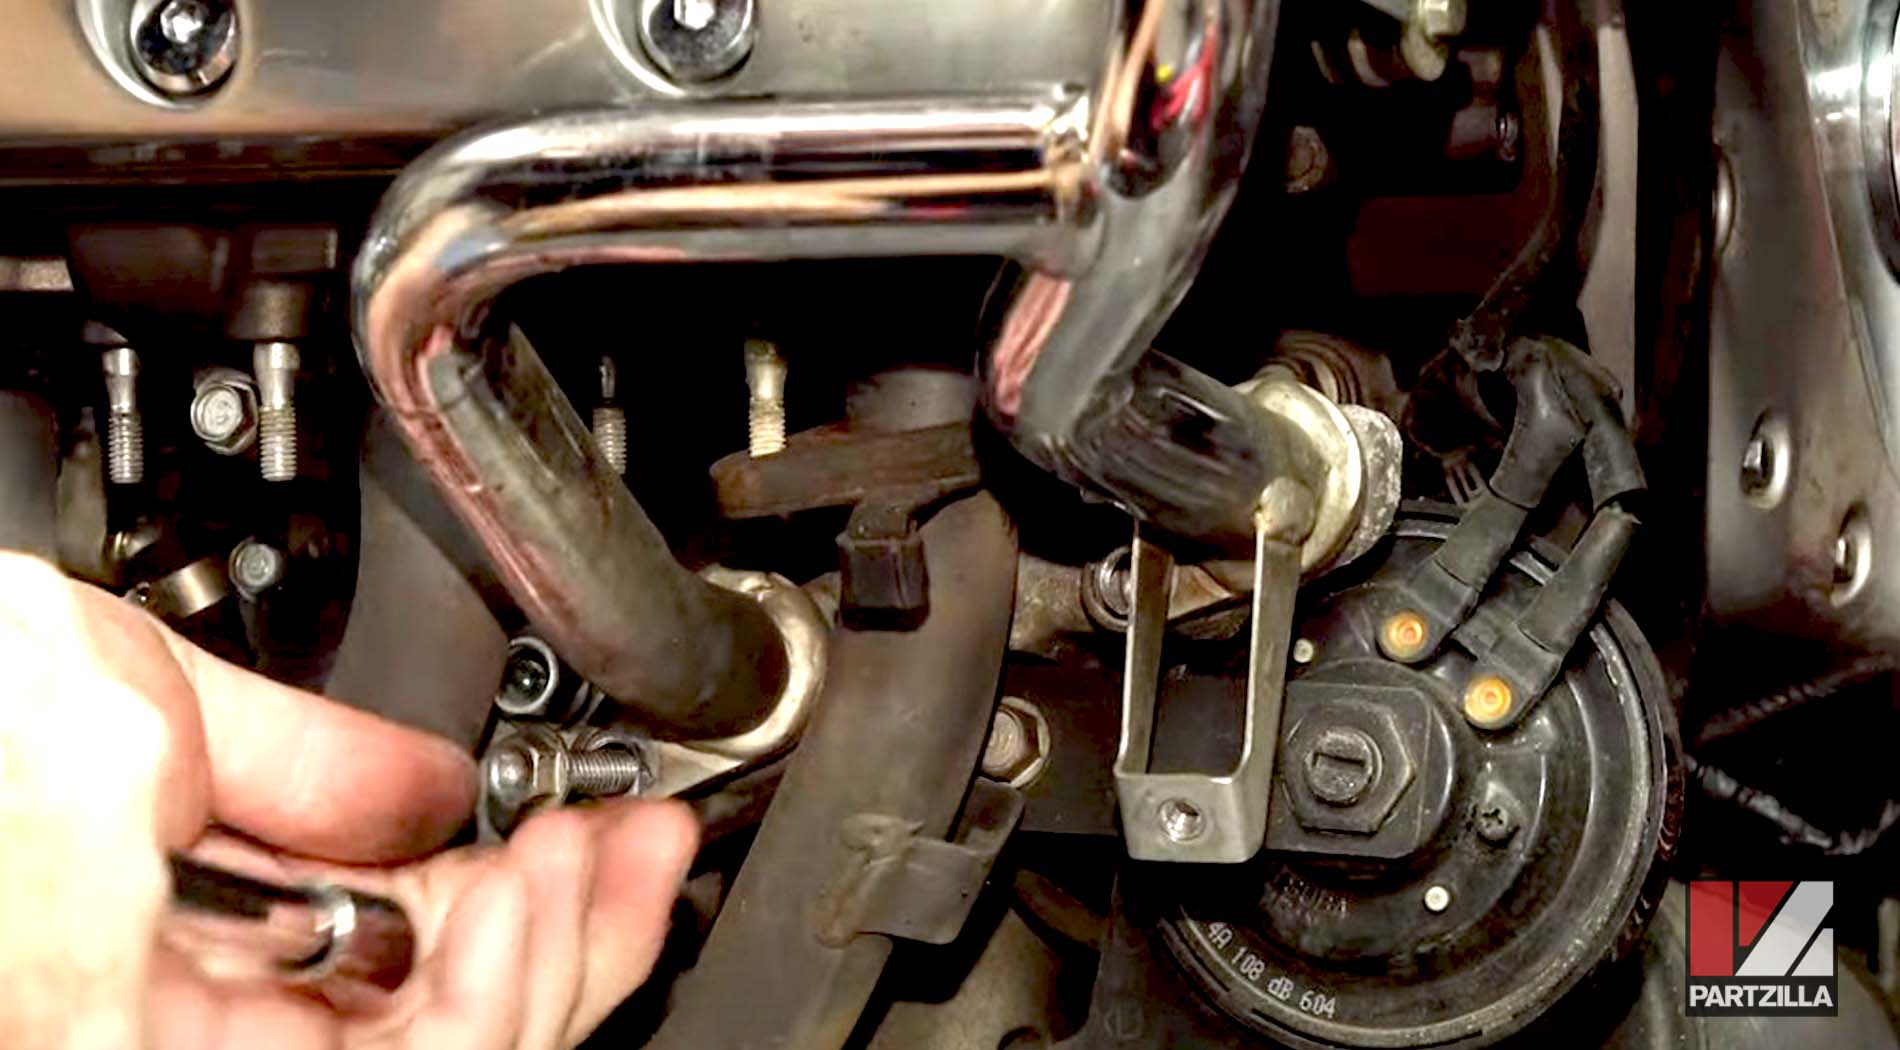 Honda GL1800 clutch pack replacement exhaust removal